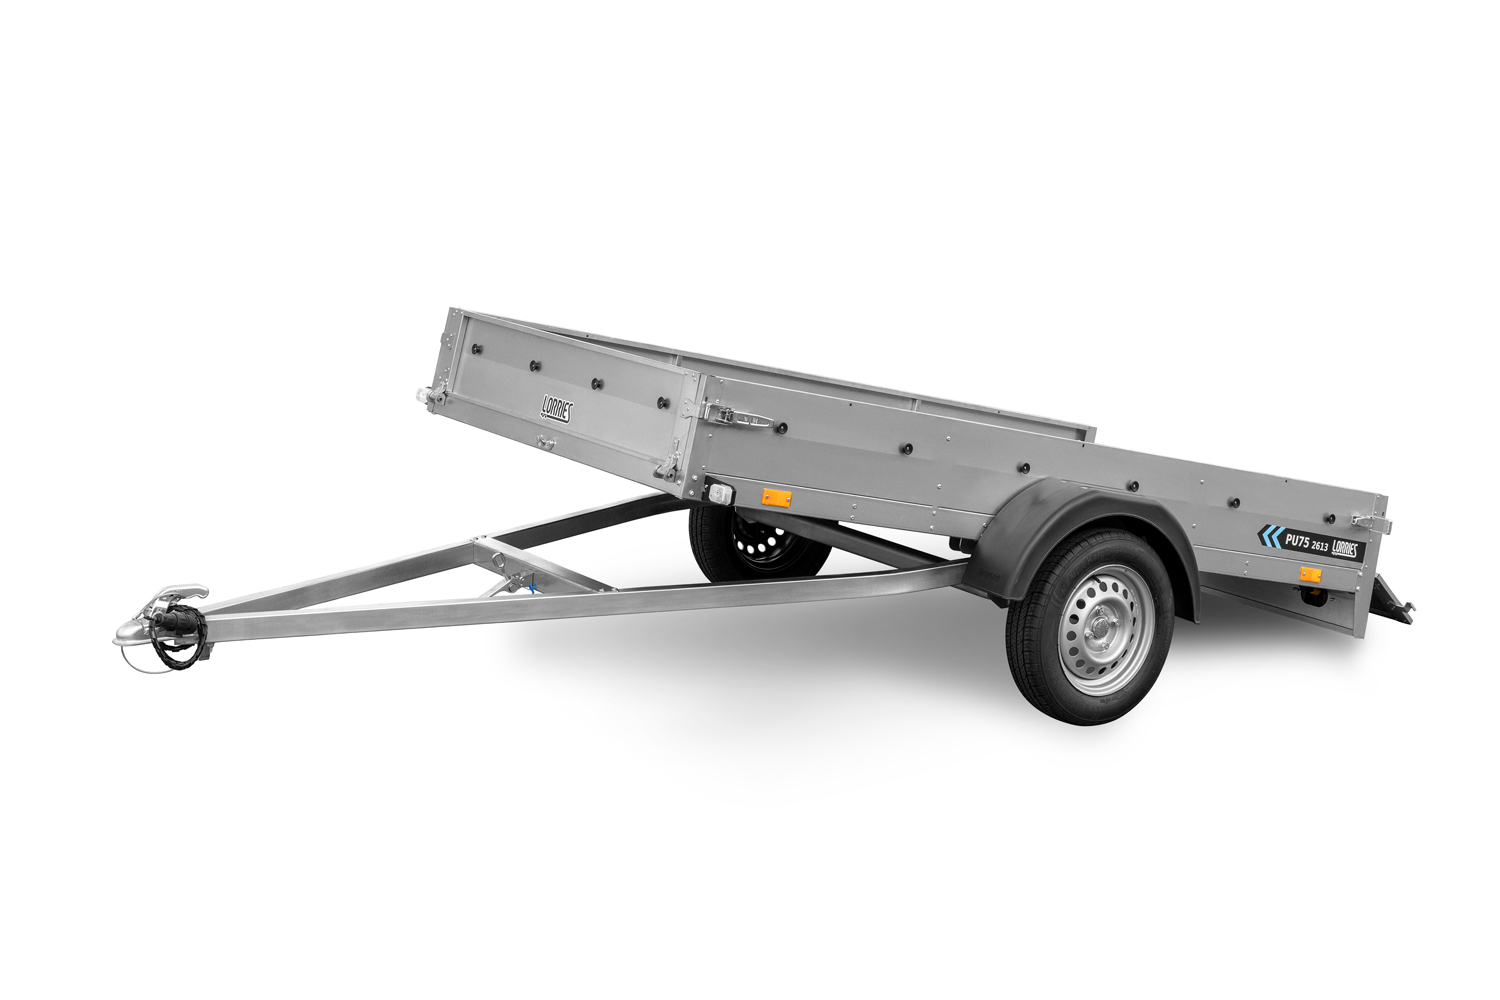 Drawbar box SMALL for all unbraked trailers up to 750 kg